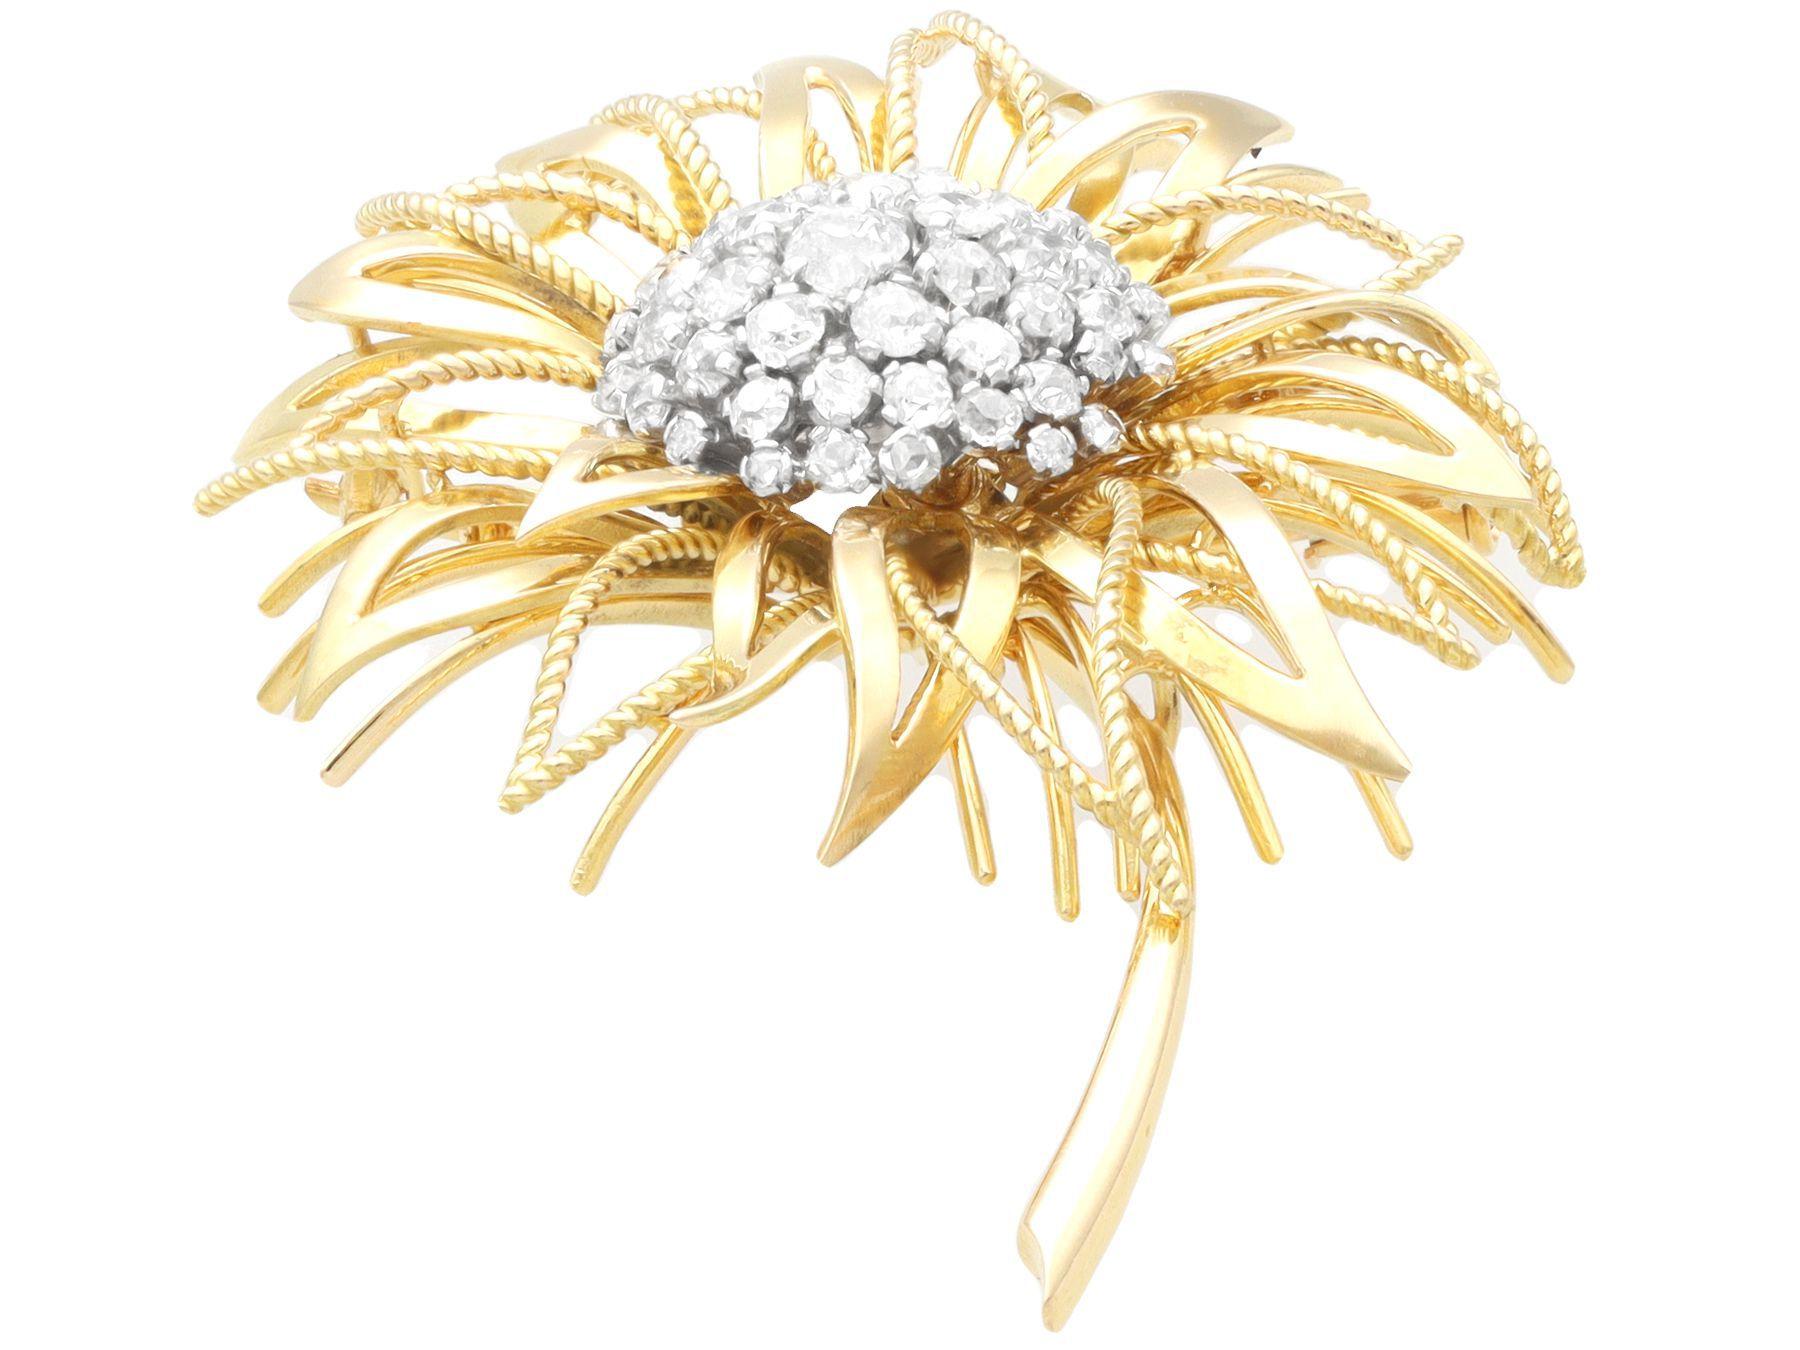 Women's or Men's Vintage French 2.89 Carat Diamond and Yellow Gold Flower Brooch, circa 1950 For Sale